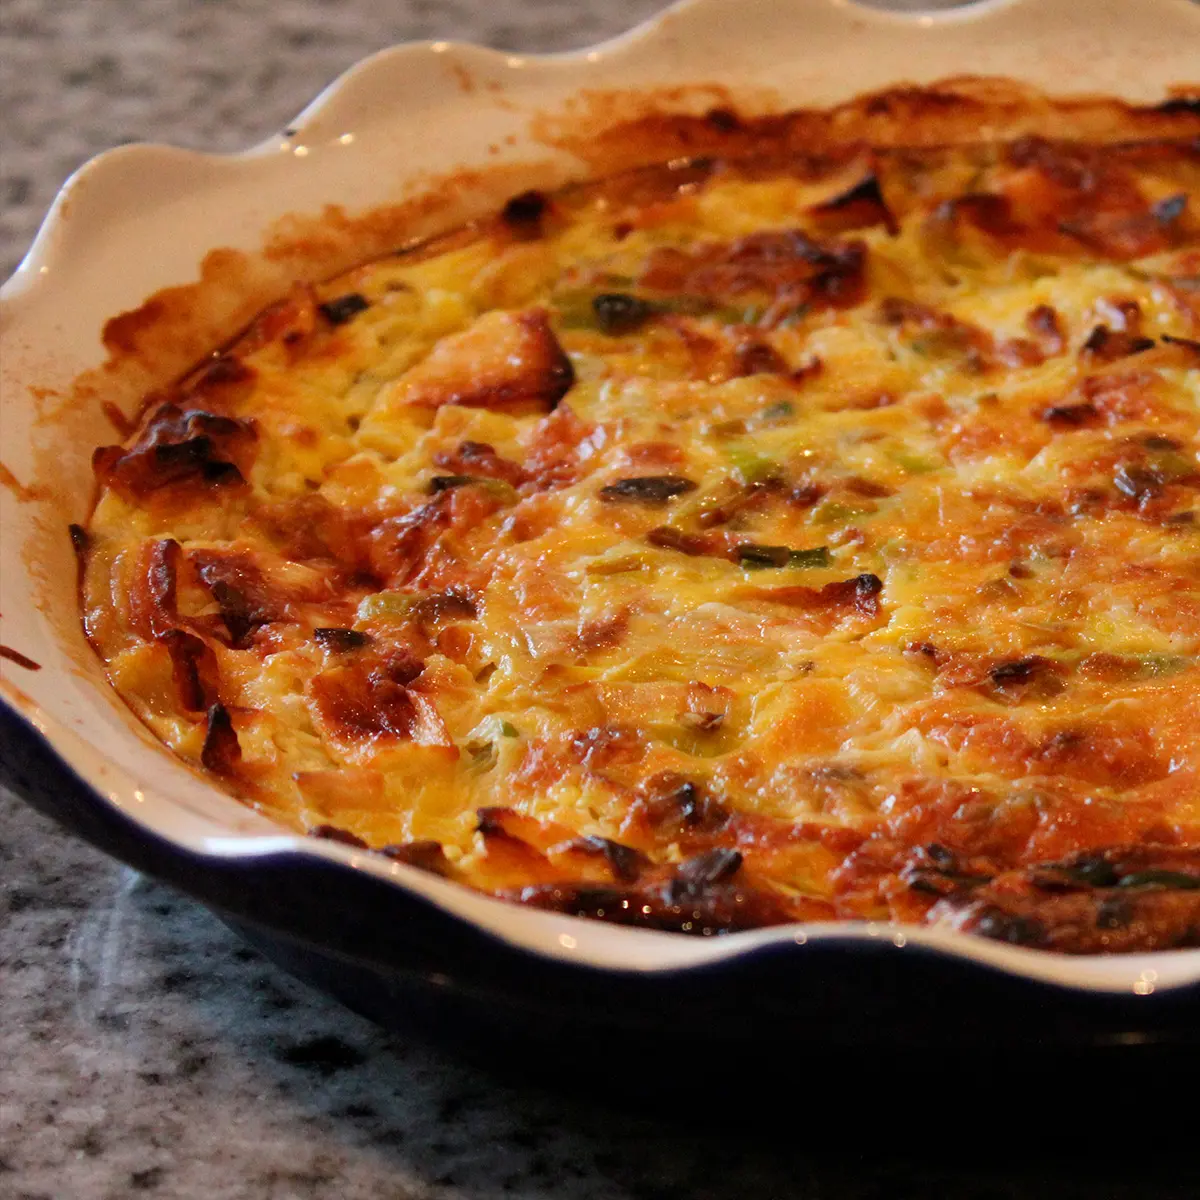 Leeks and apples quiches, healthy version